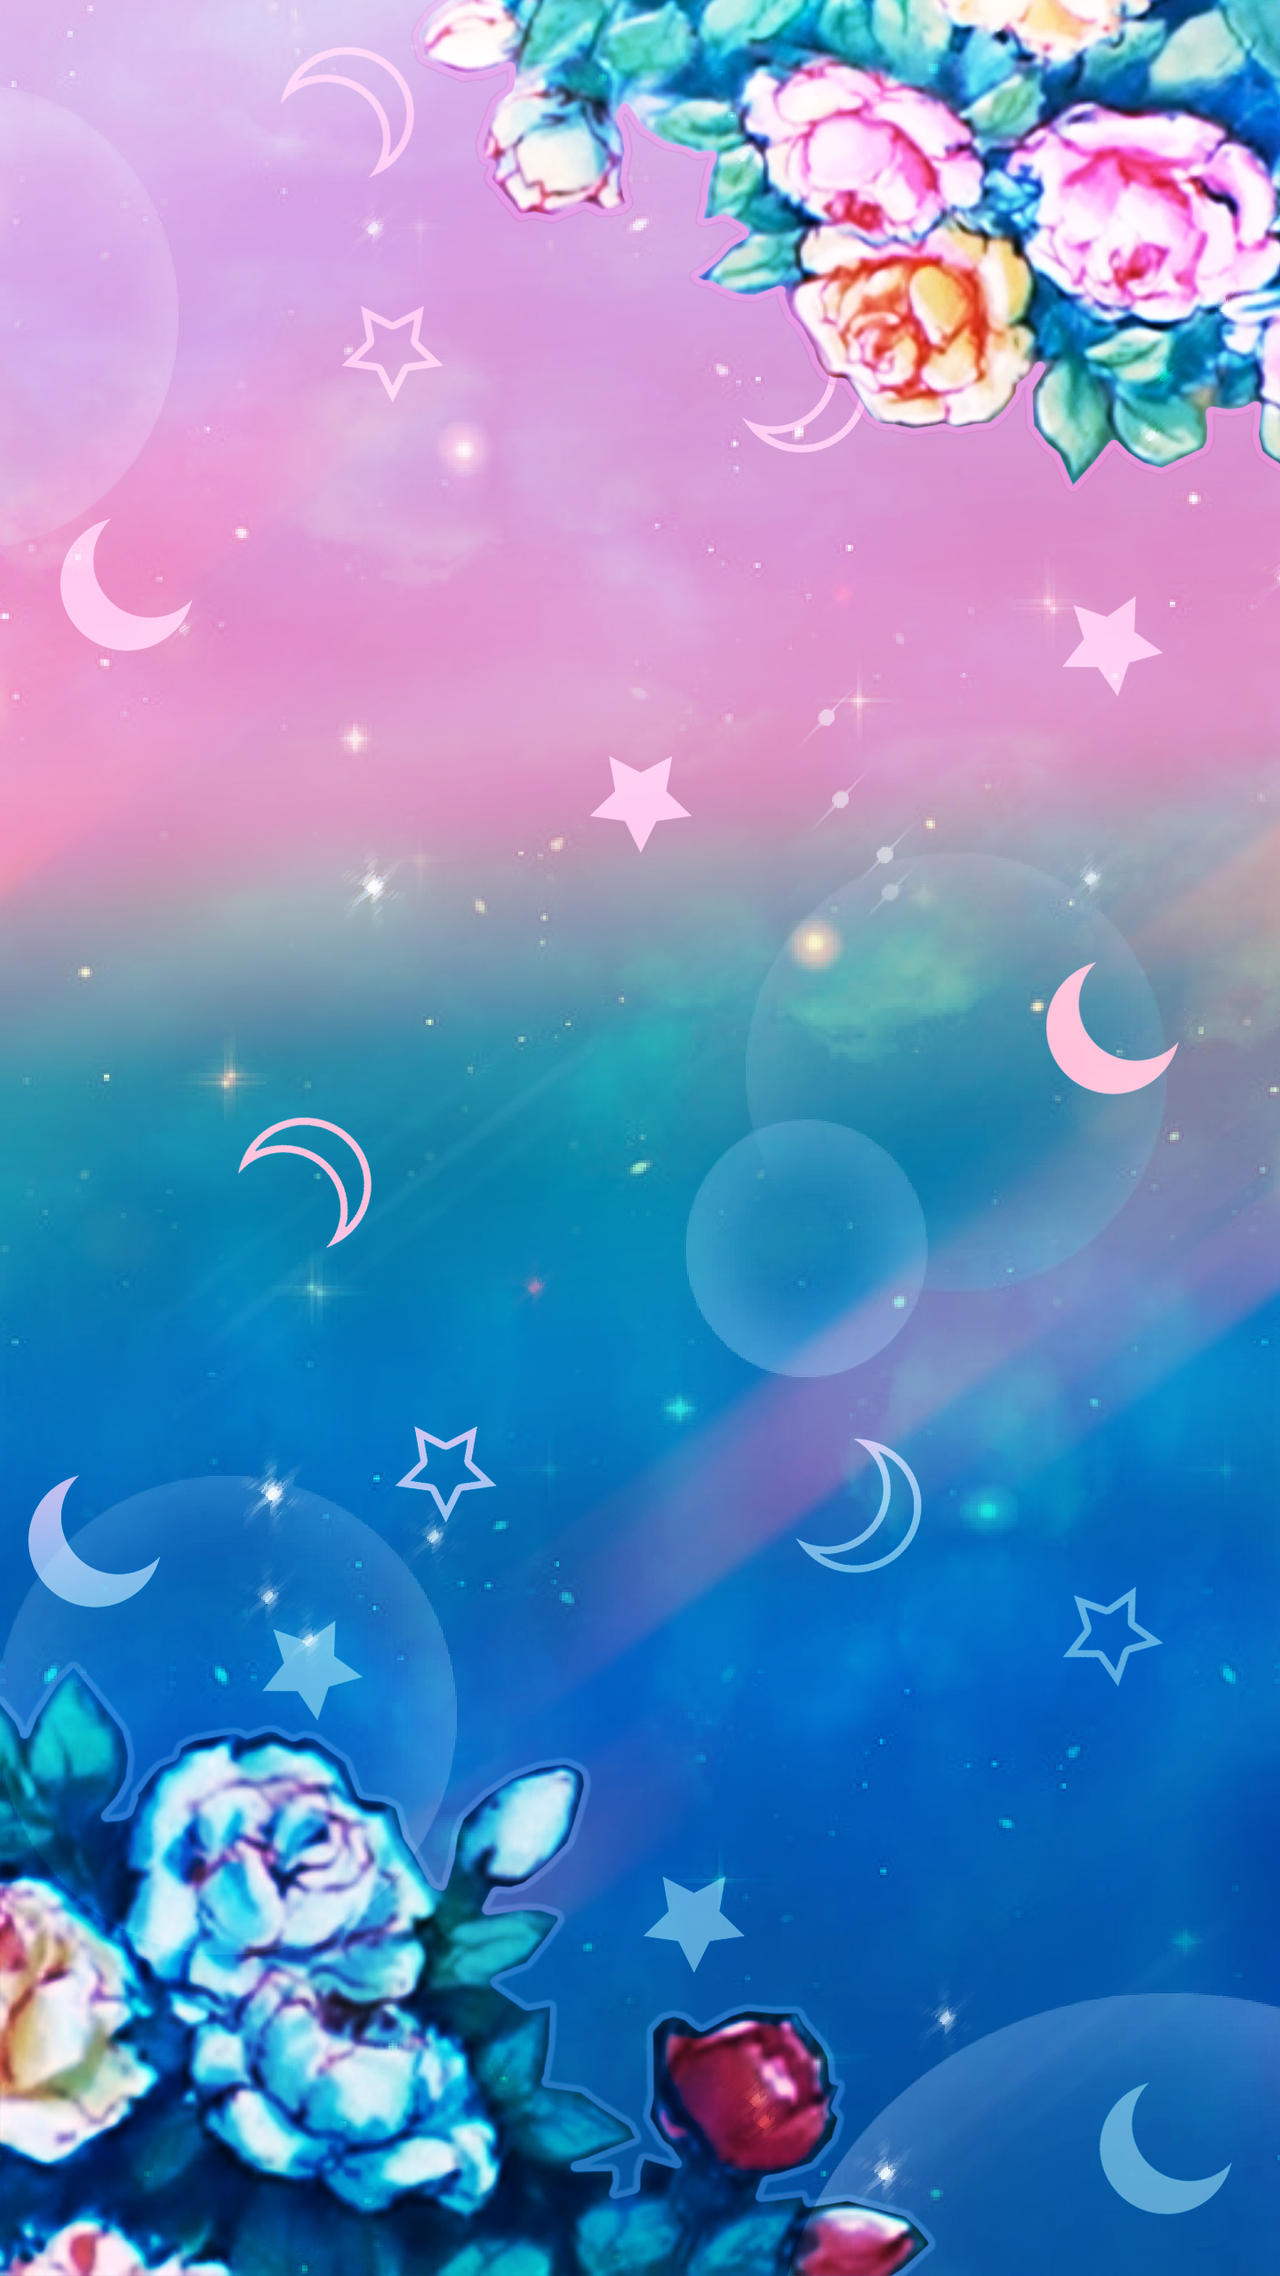 Sailor Moon Floral- Chibiusa Phone Wallpaper by octobomb on DeviantArt